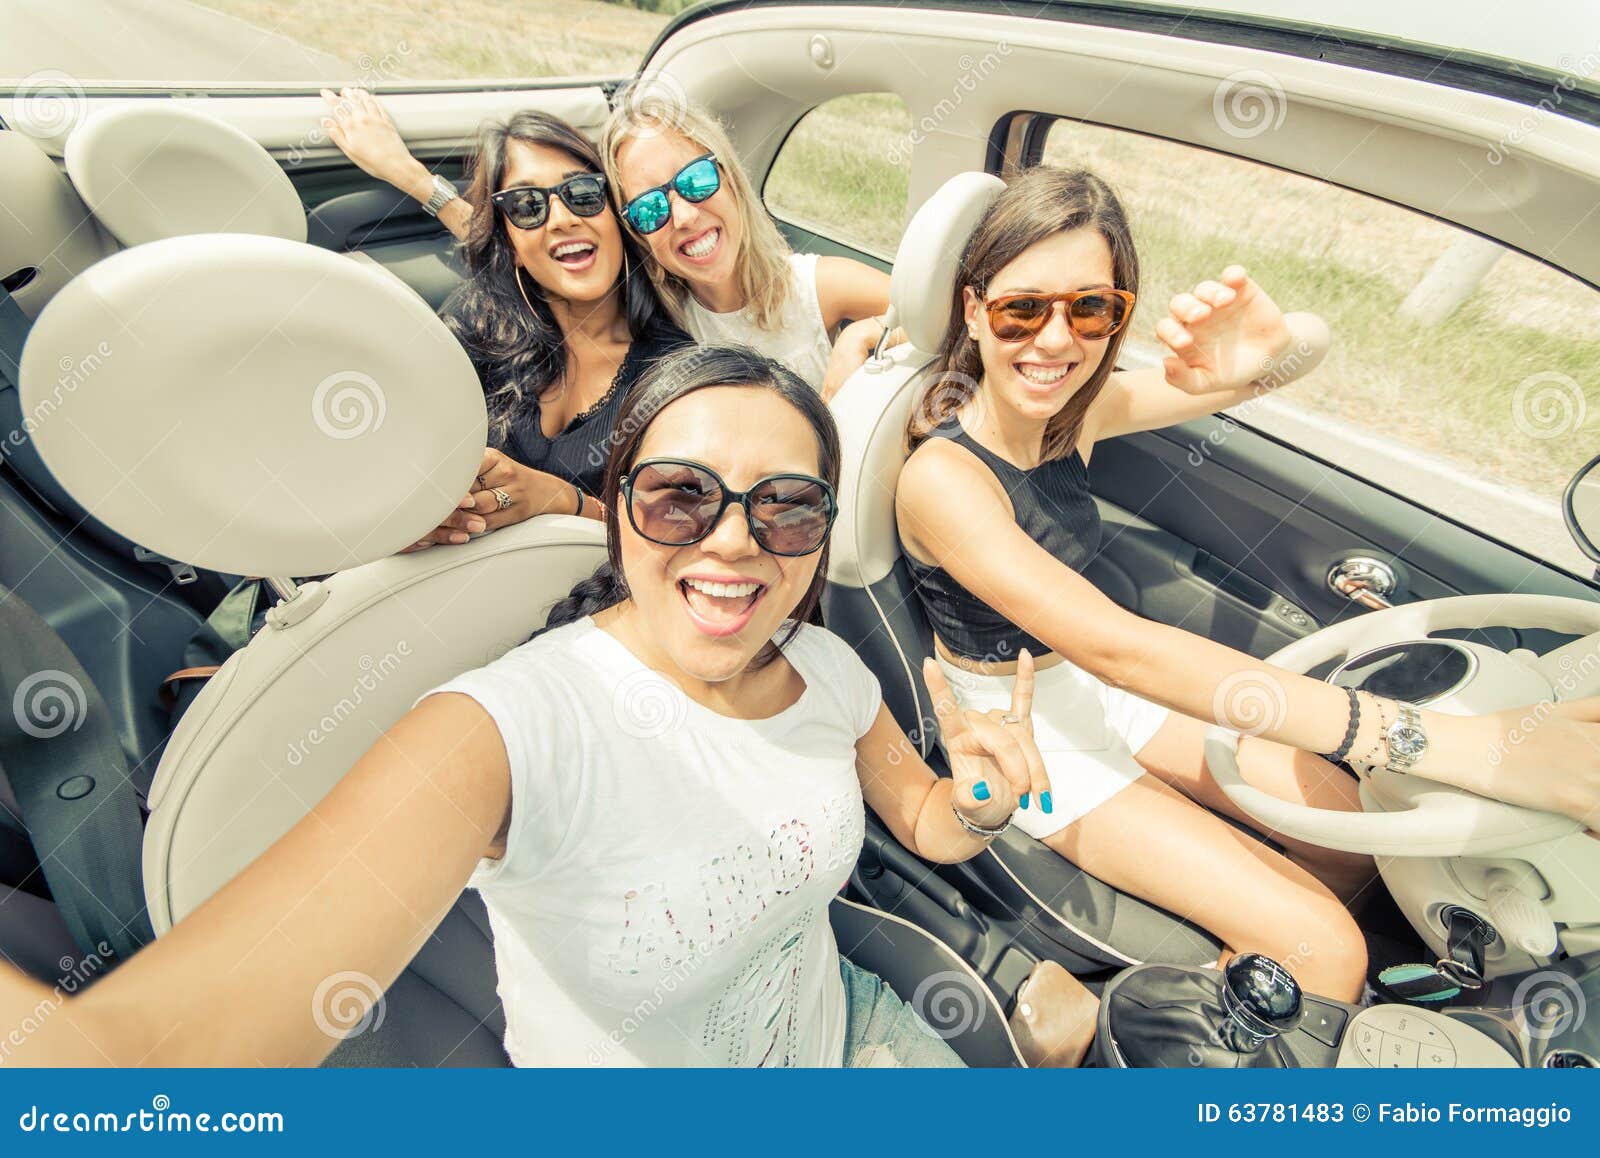 pretty car group selfie free pics and video